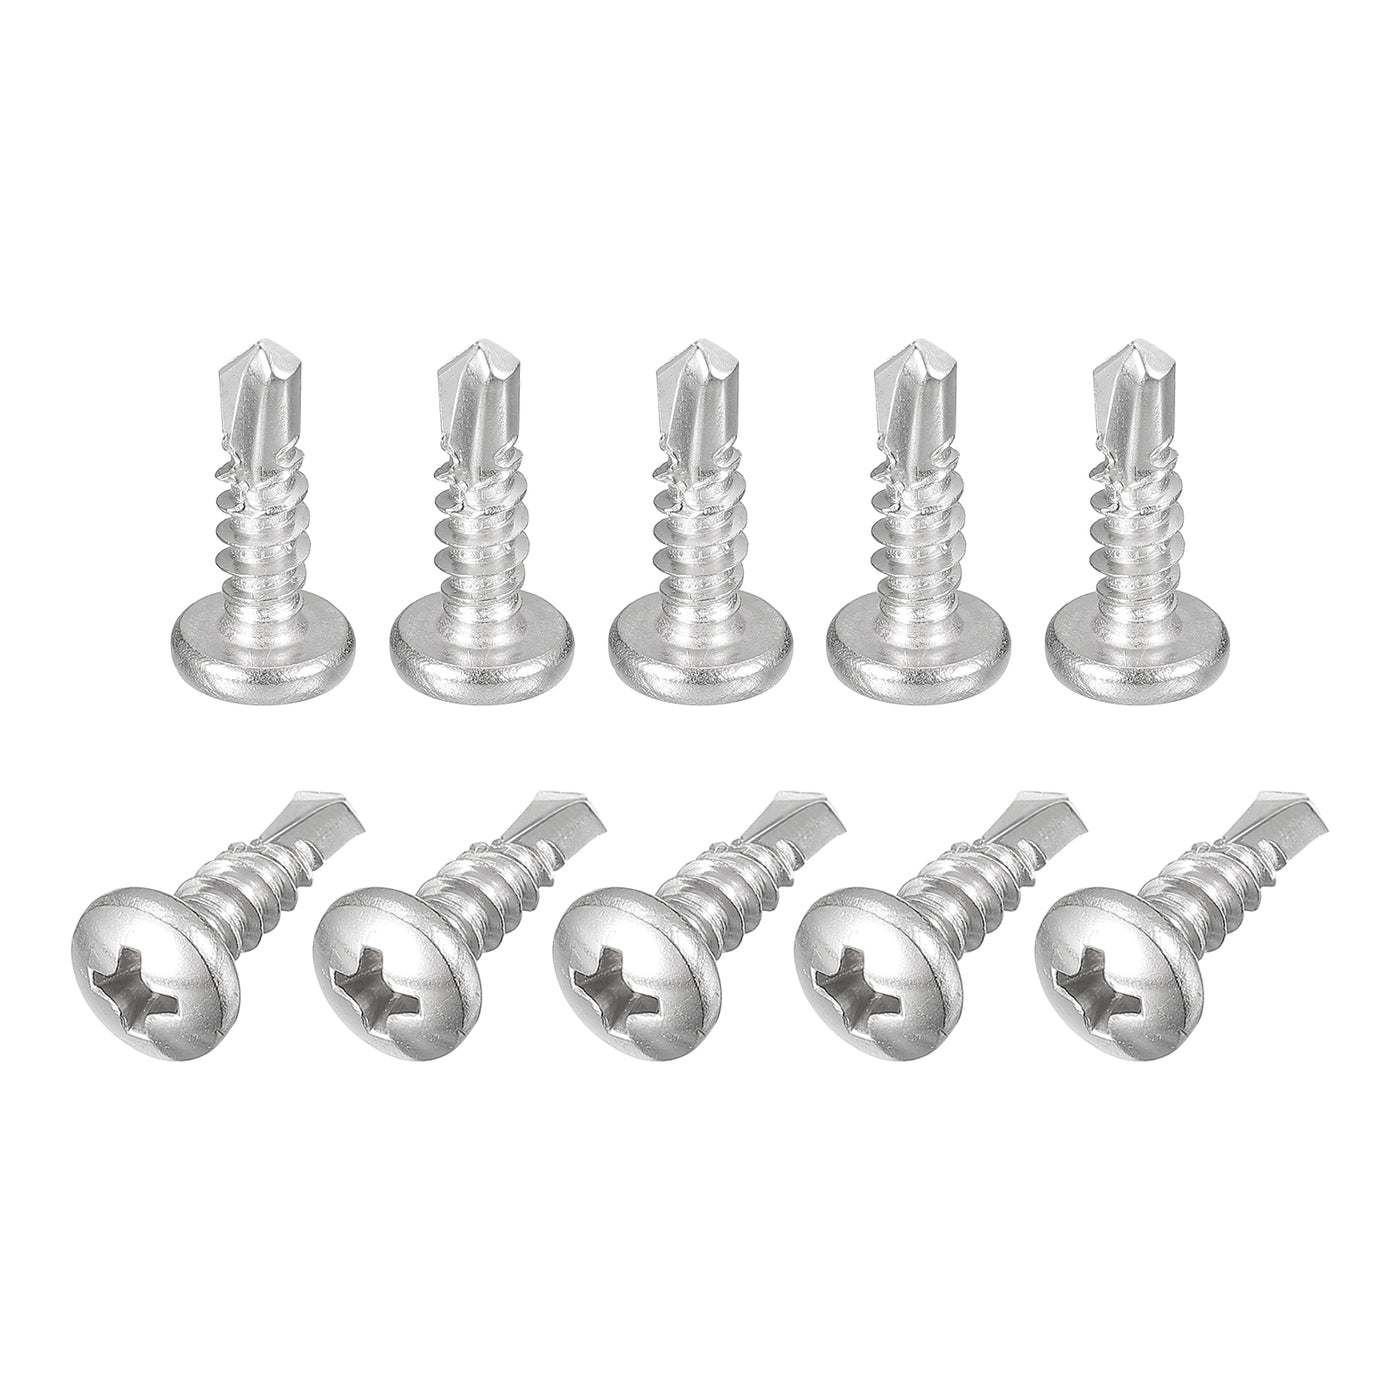 uxcell Uxcell #10 x 5/8" Self Drilling Screws, 20pcs Phillips Pan Head Self Tapping Screws